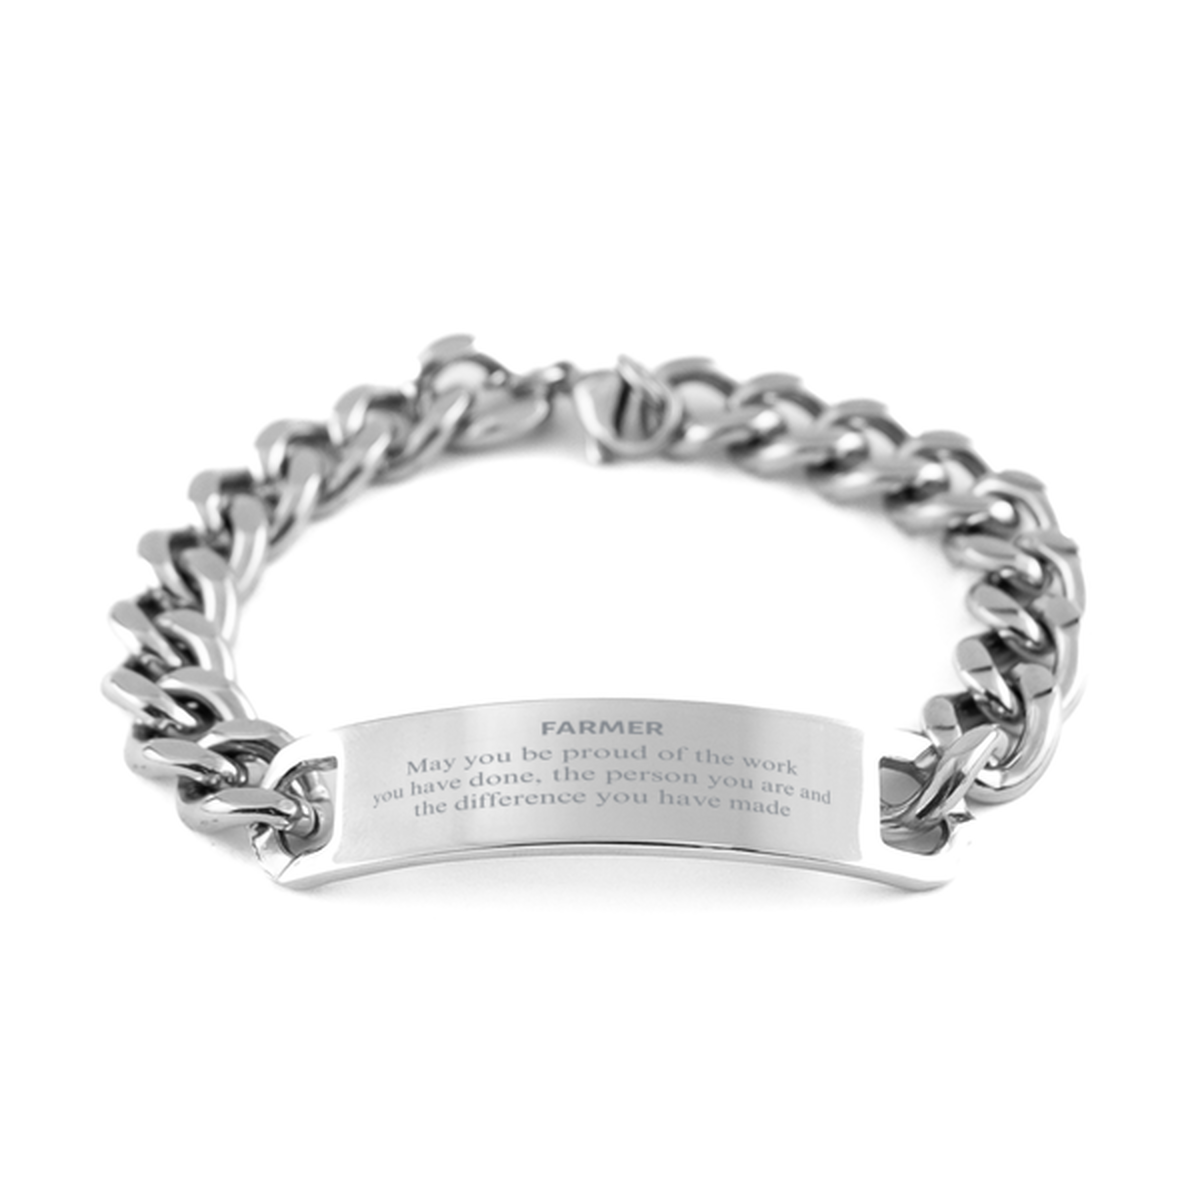 Farmer May you be proud of the work you have done, Retirement Farmer Cuban Chain Stainless Steel Bracelet for Colleague Appreciation Gifts Amazing for Farmer